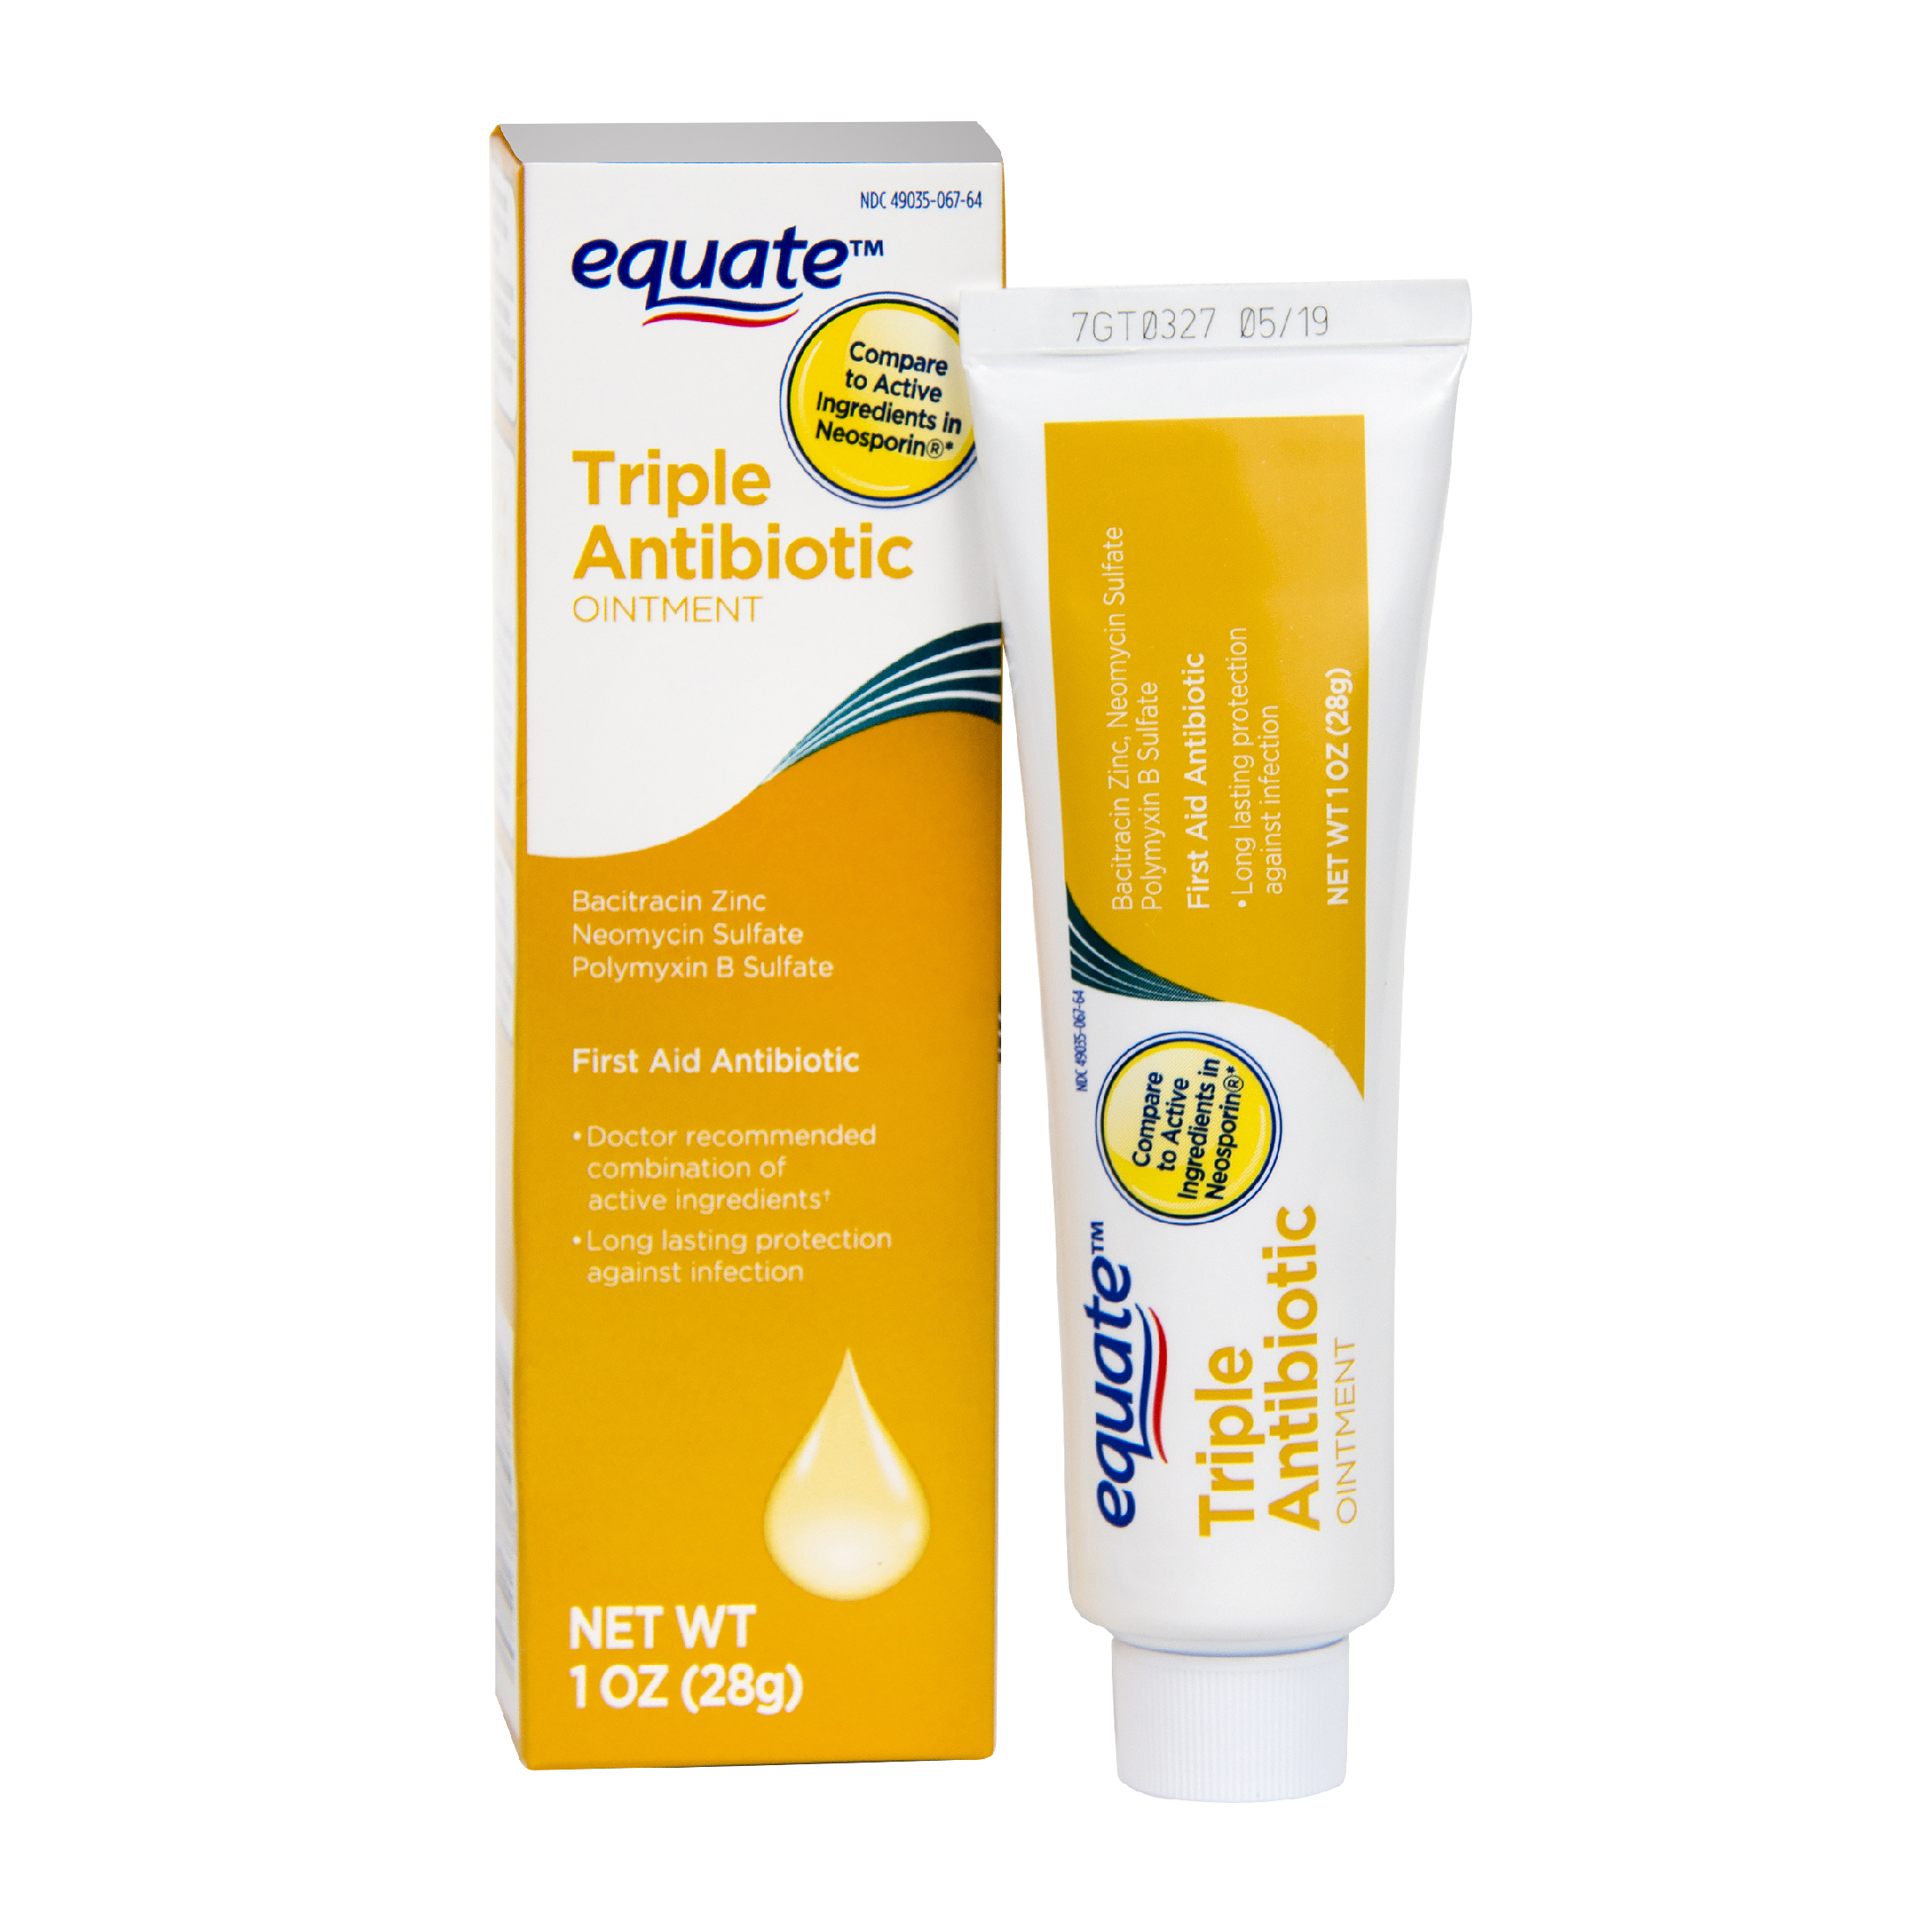 Equate First Aid Triple Antibiotic Ointment, 1 Ounce - image 2 of 7